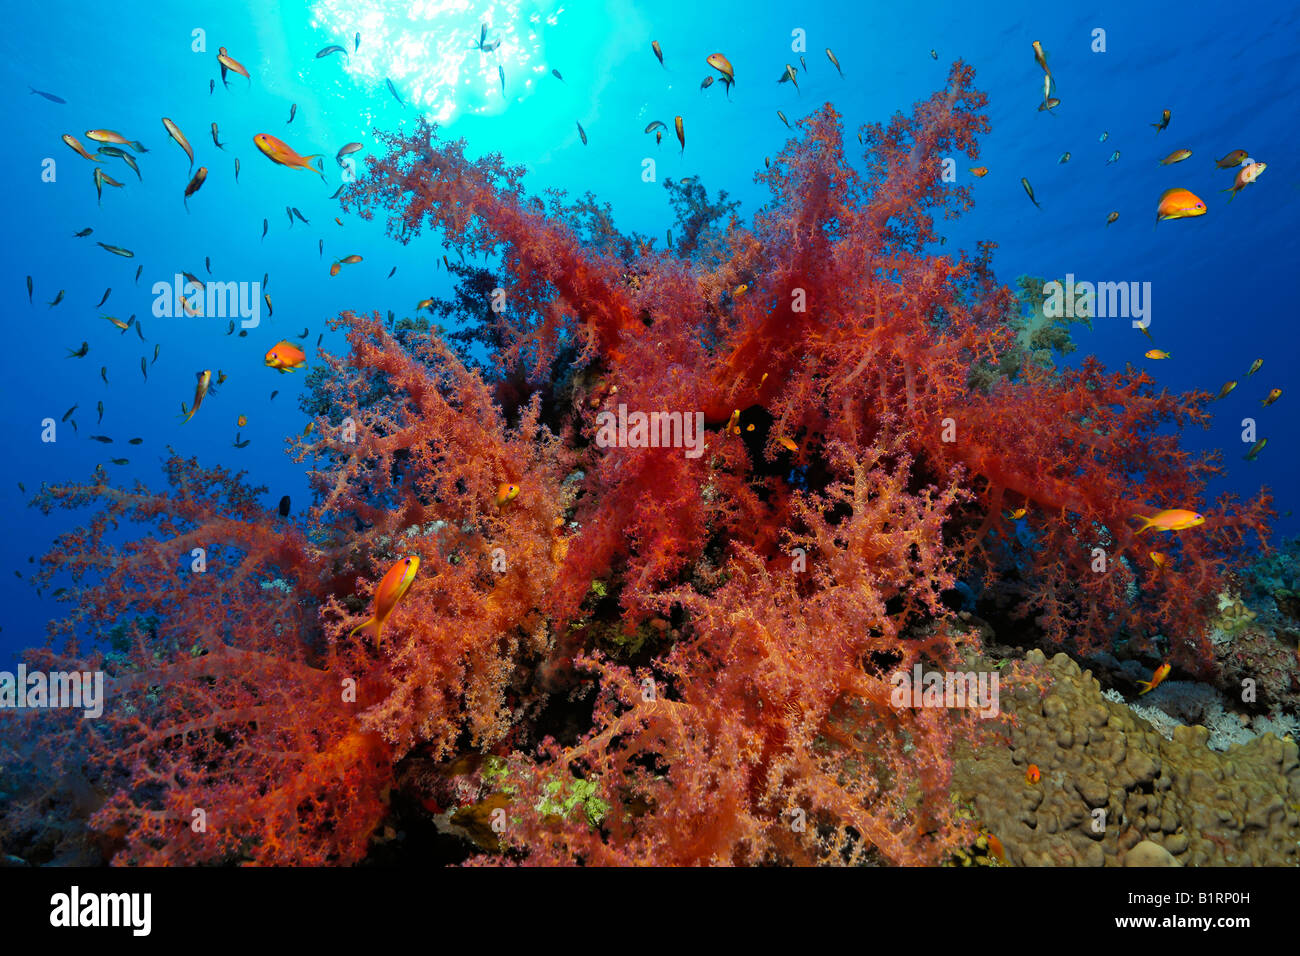 Red oceanic soft coral settled on a coral reef, Hurghada, Sharm el Sheik, Red Sea, Egypt, Africa Stock Photo